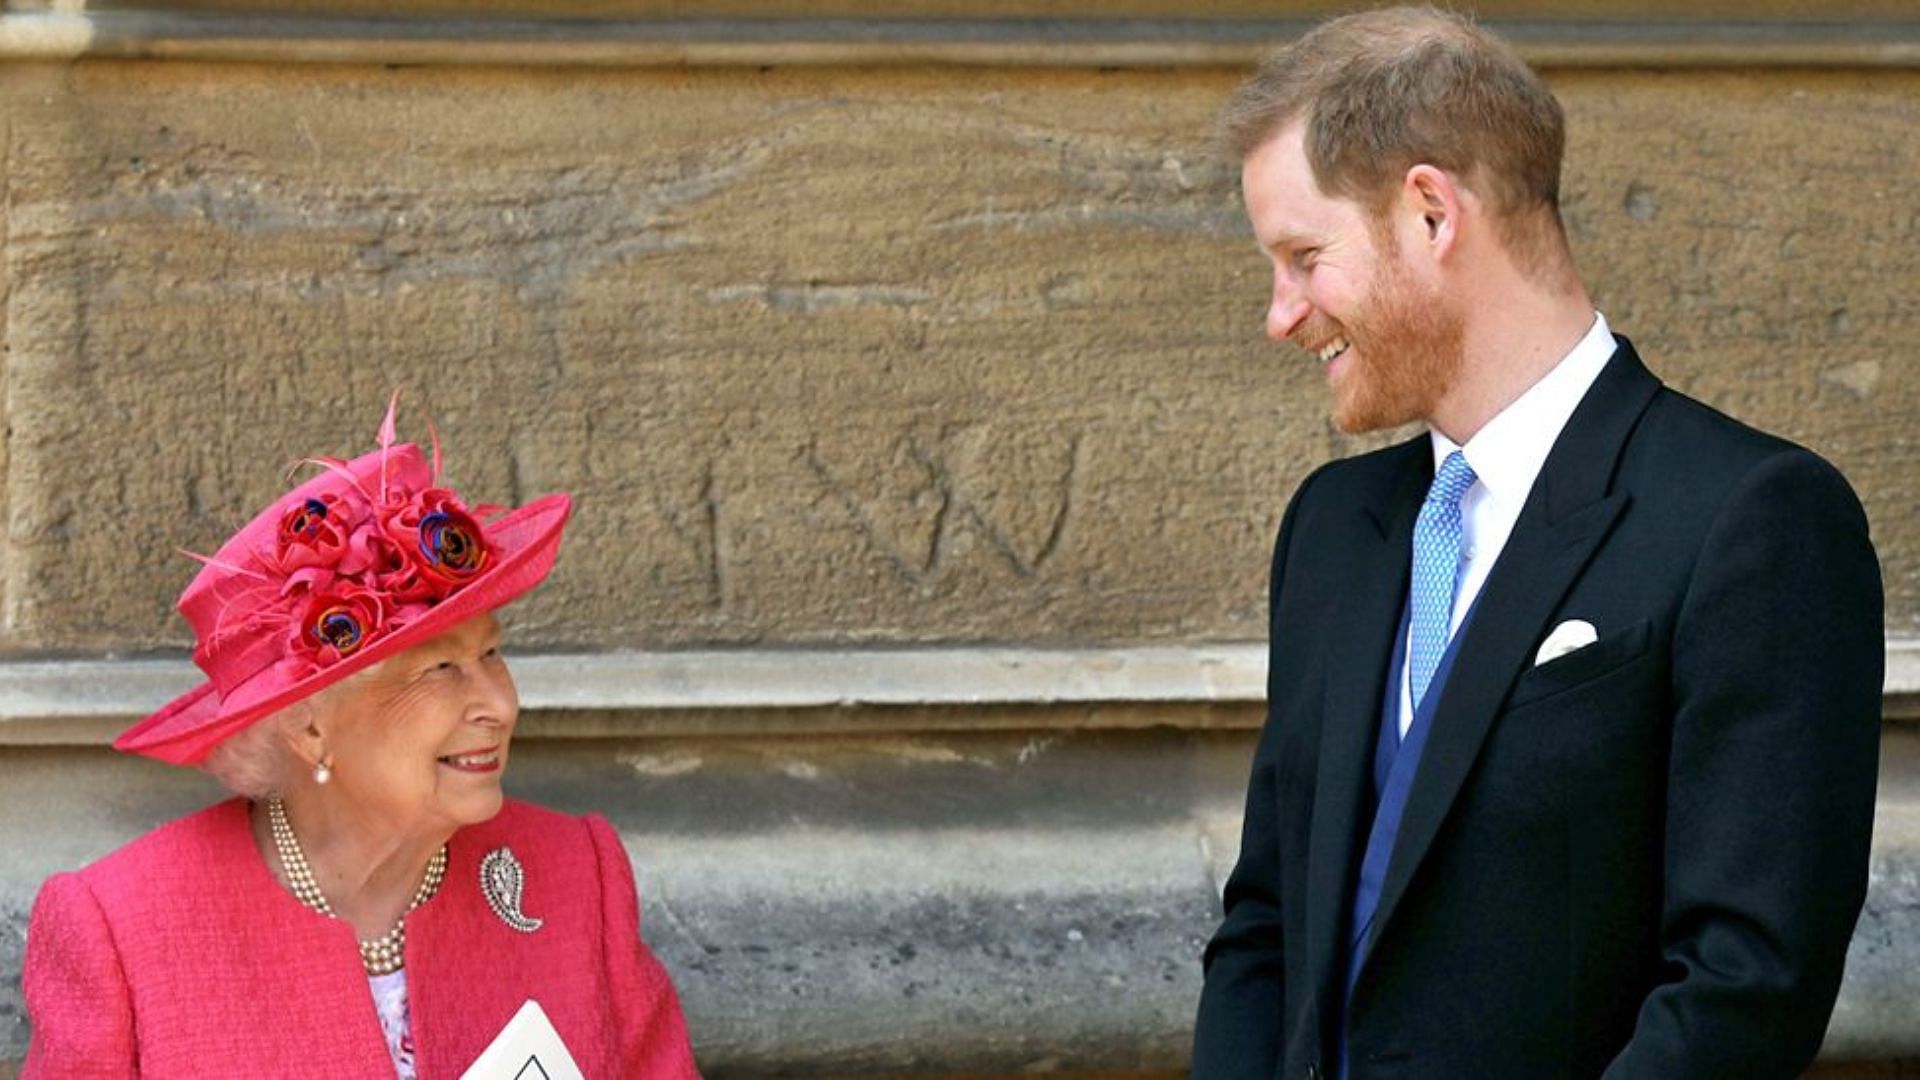 Queen Elizabeth II with grandson Prince Harry in 2019. (Image via WPA Pool/Getty Images)